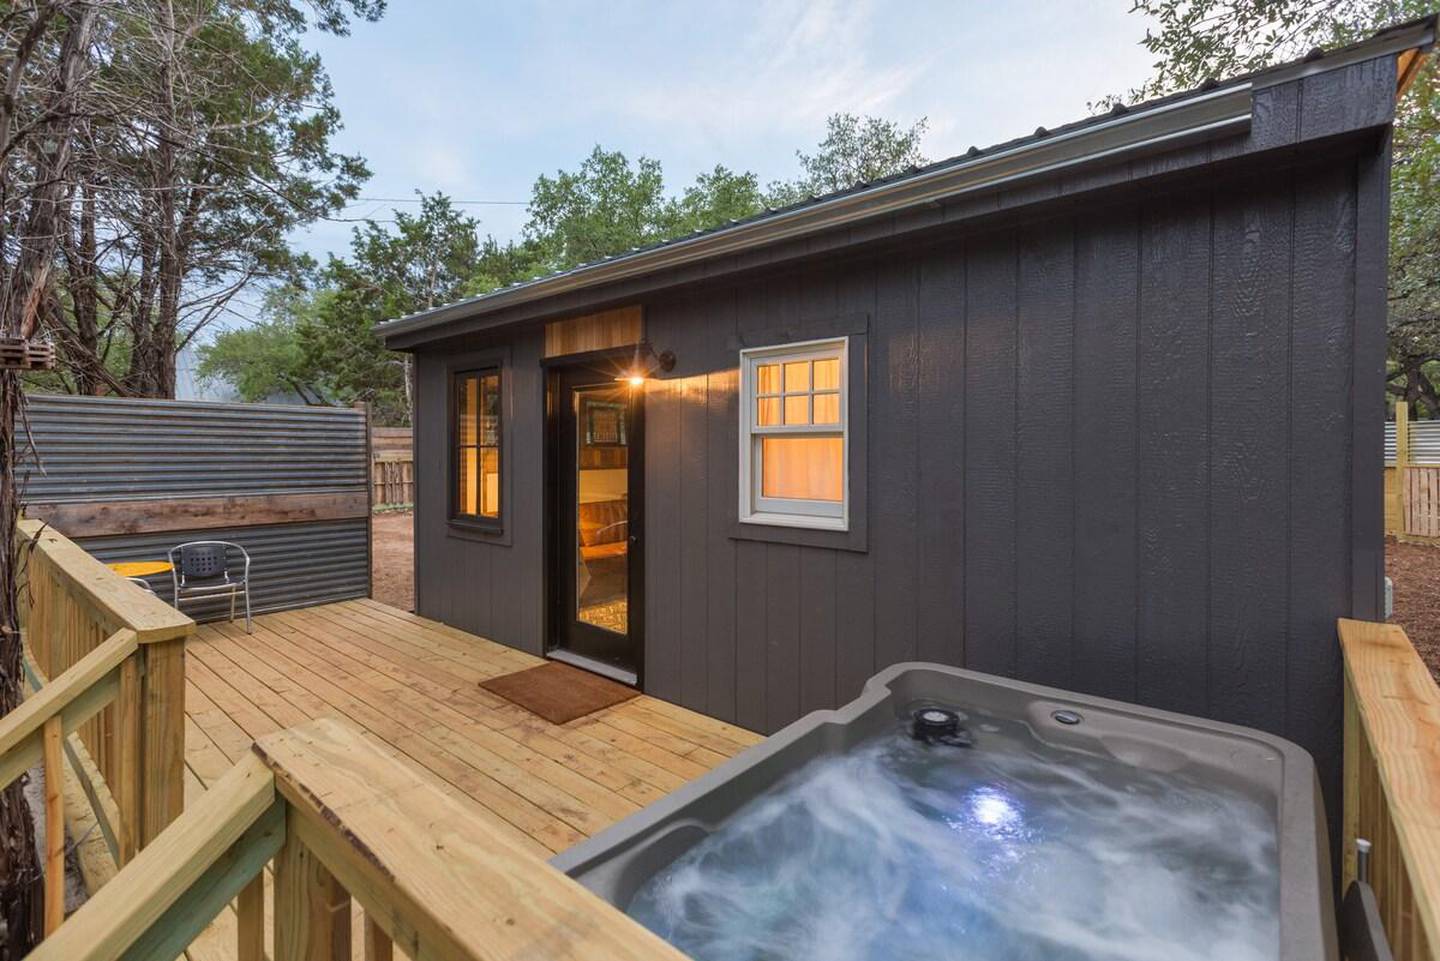 A tiny house with its own hot tub, picnic area and hammocks makes for one of the most romantic Airbnb stays in Texas. Courtesy Airbnb